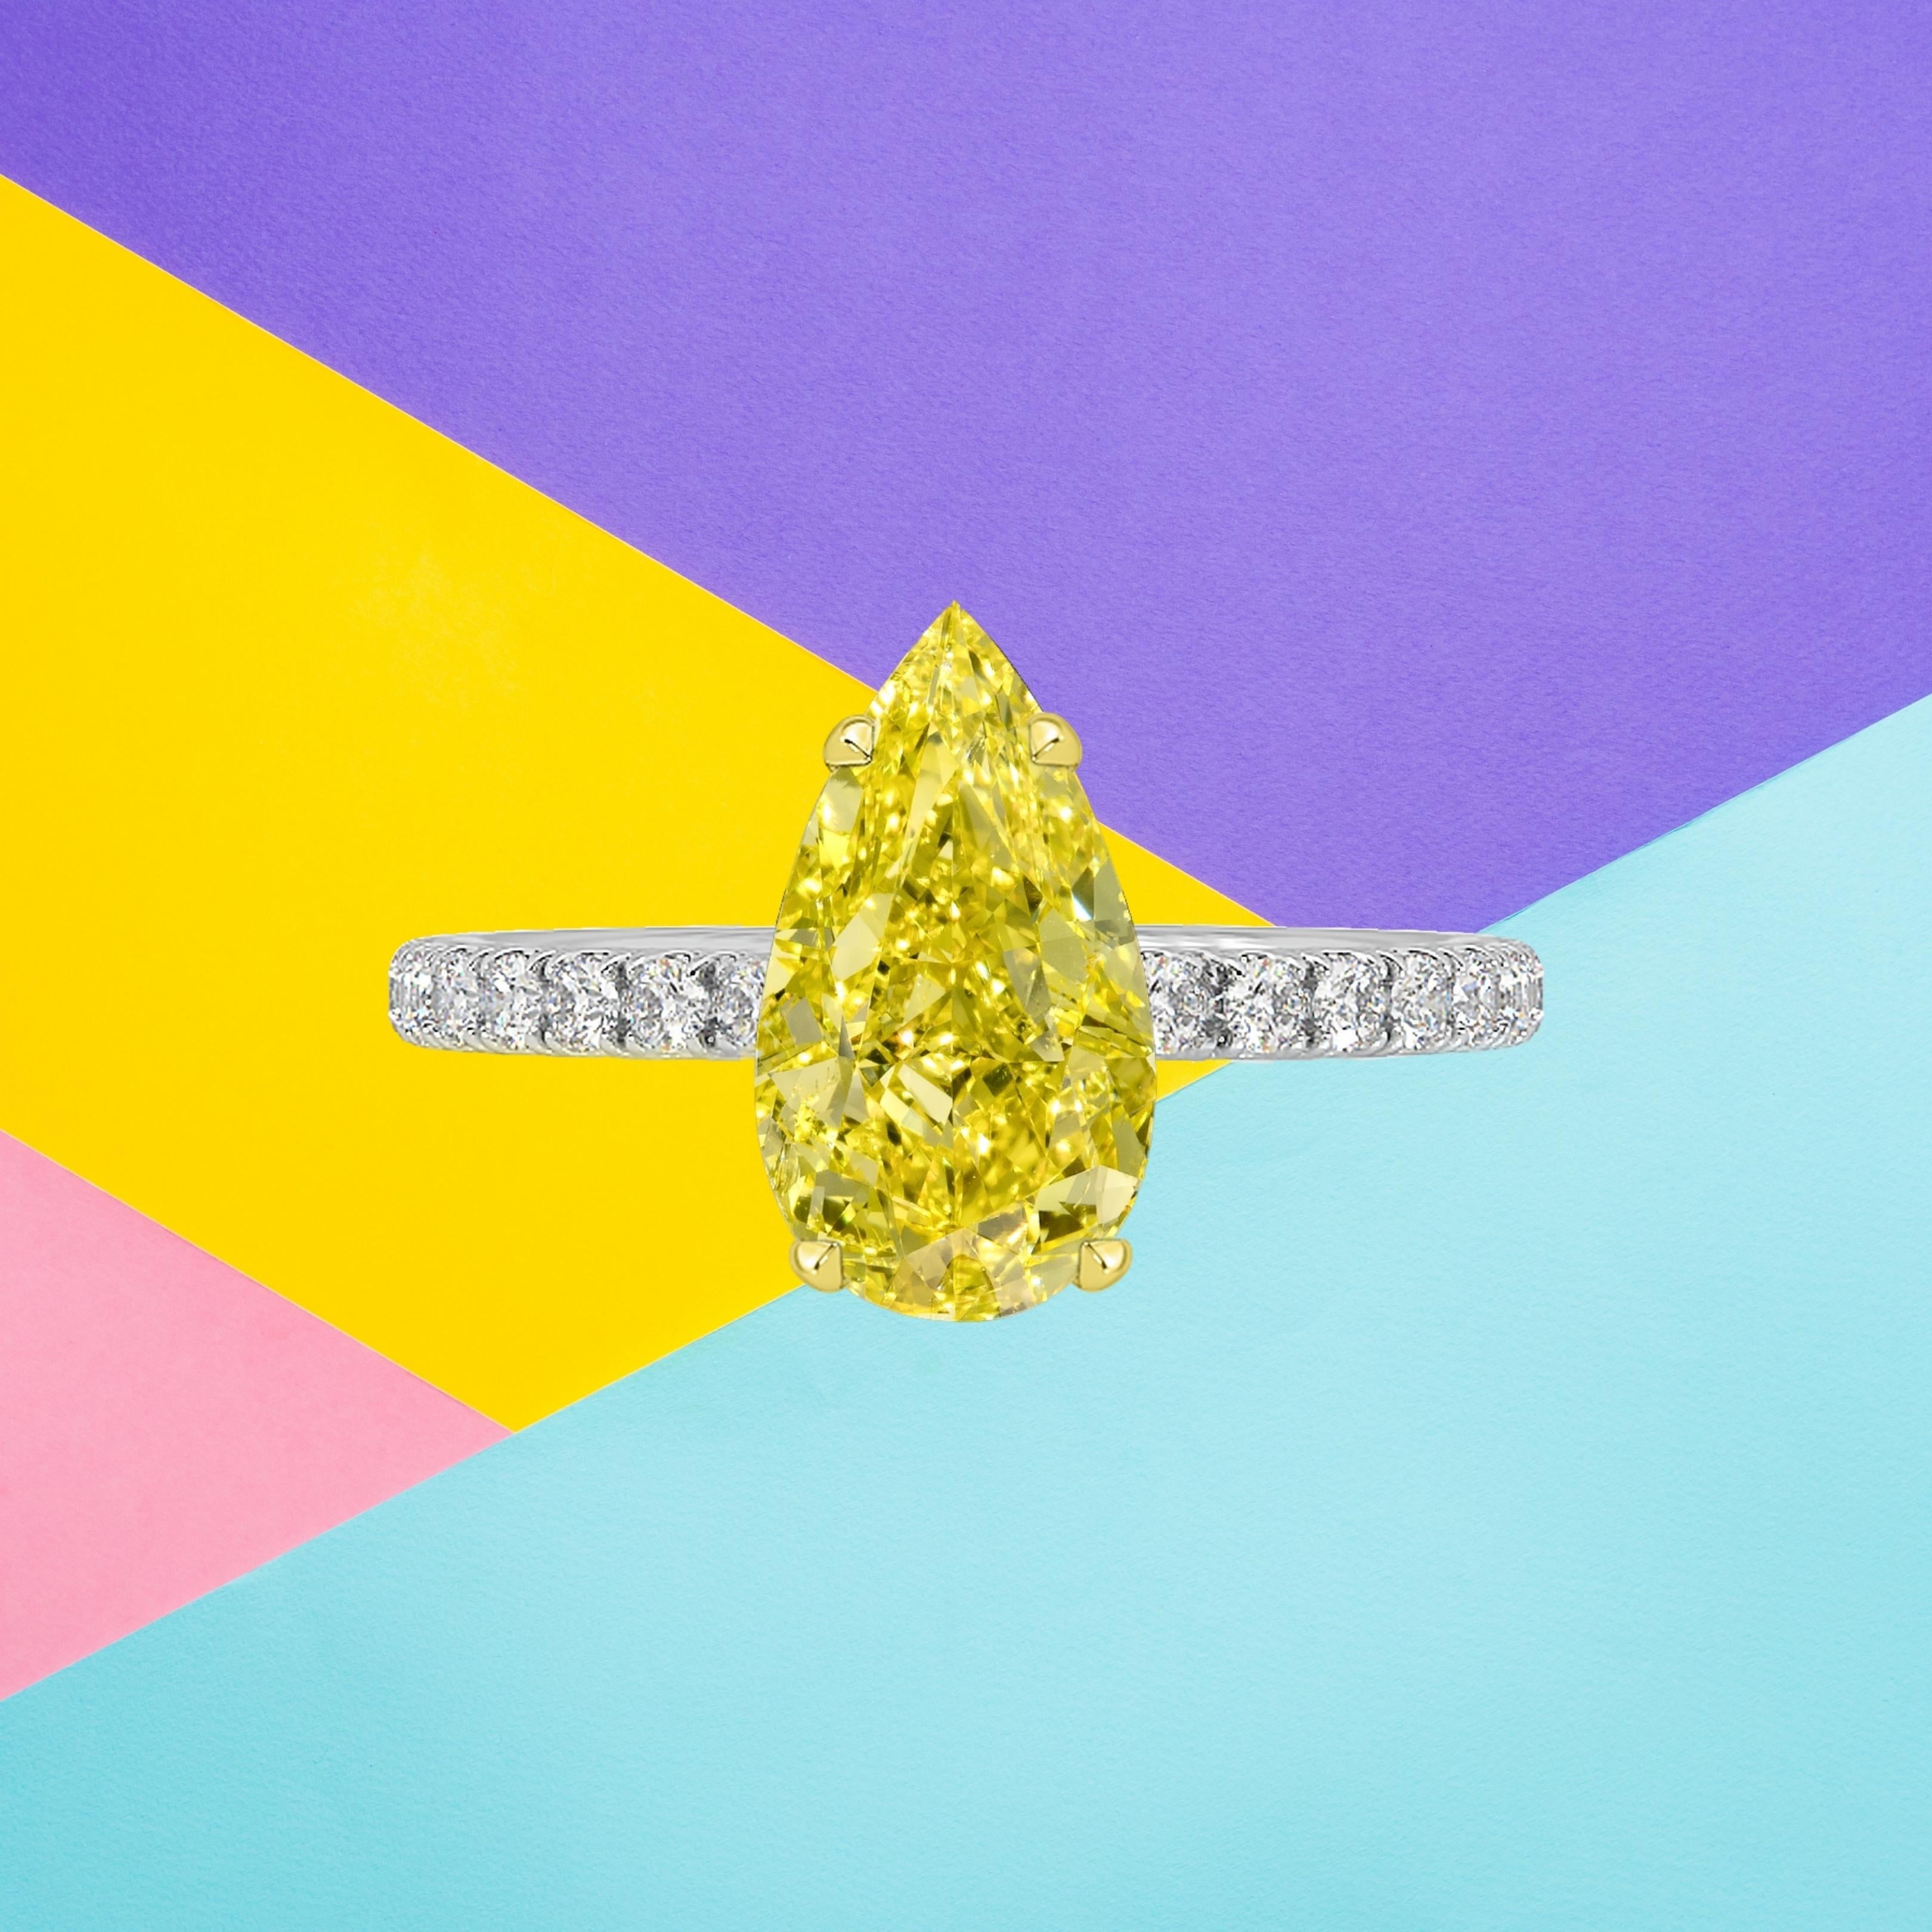 This pear shape diamond weighs 1.00 carat and is certified 'Fancy Vivid Yellow' color by the Gemmological Institute of America. The GIA has also assigned a SI2 clarity grade to the stone. The diamond has been inscribed with the certificate number to